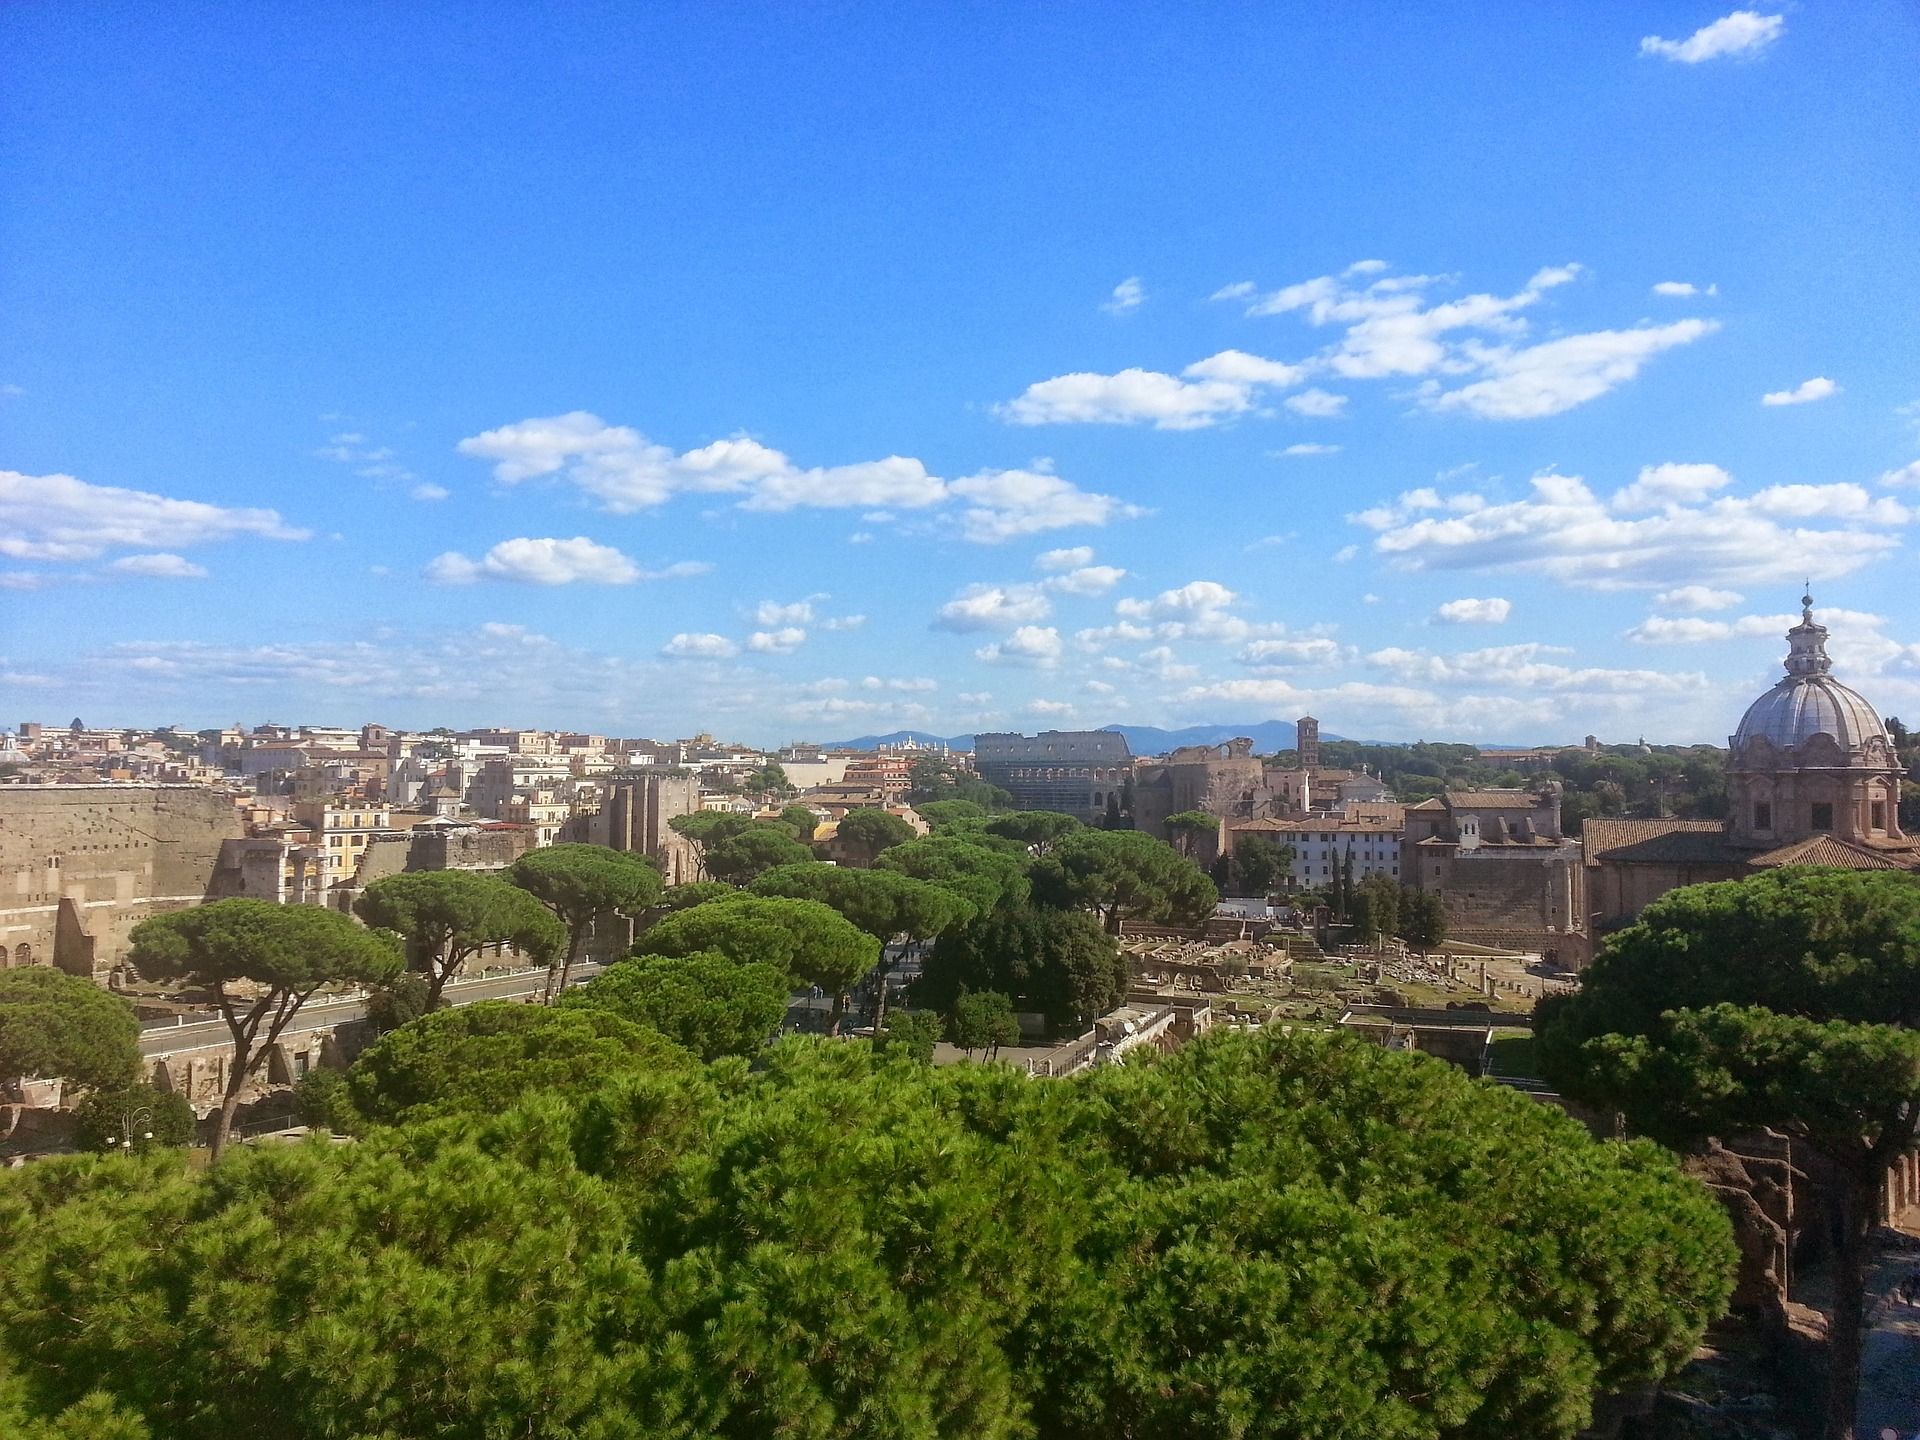 On the trail of parks and gardens of Rome – main image